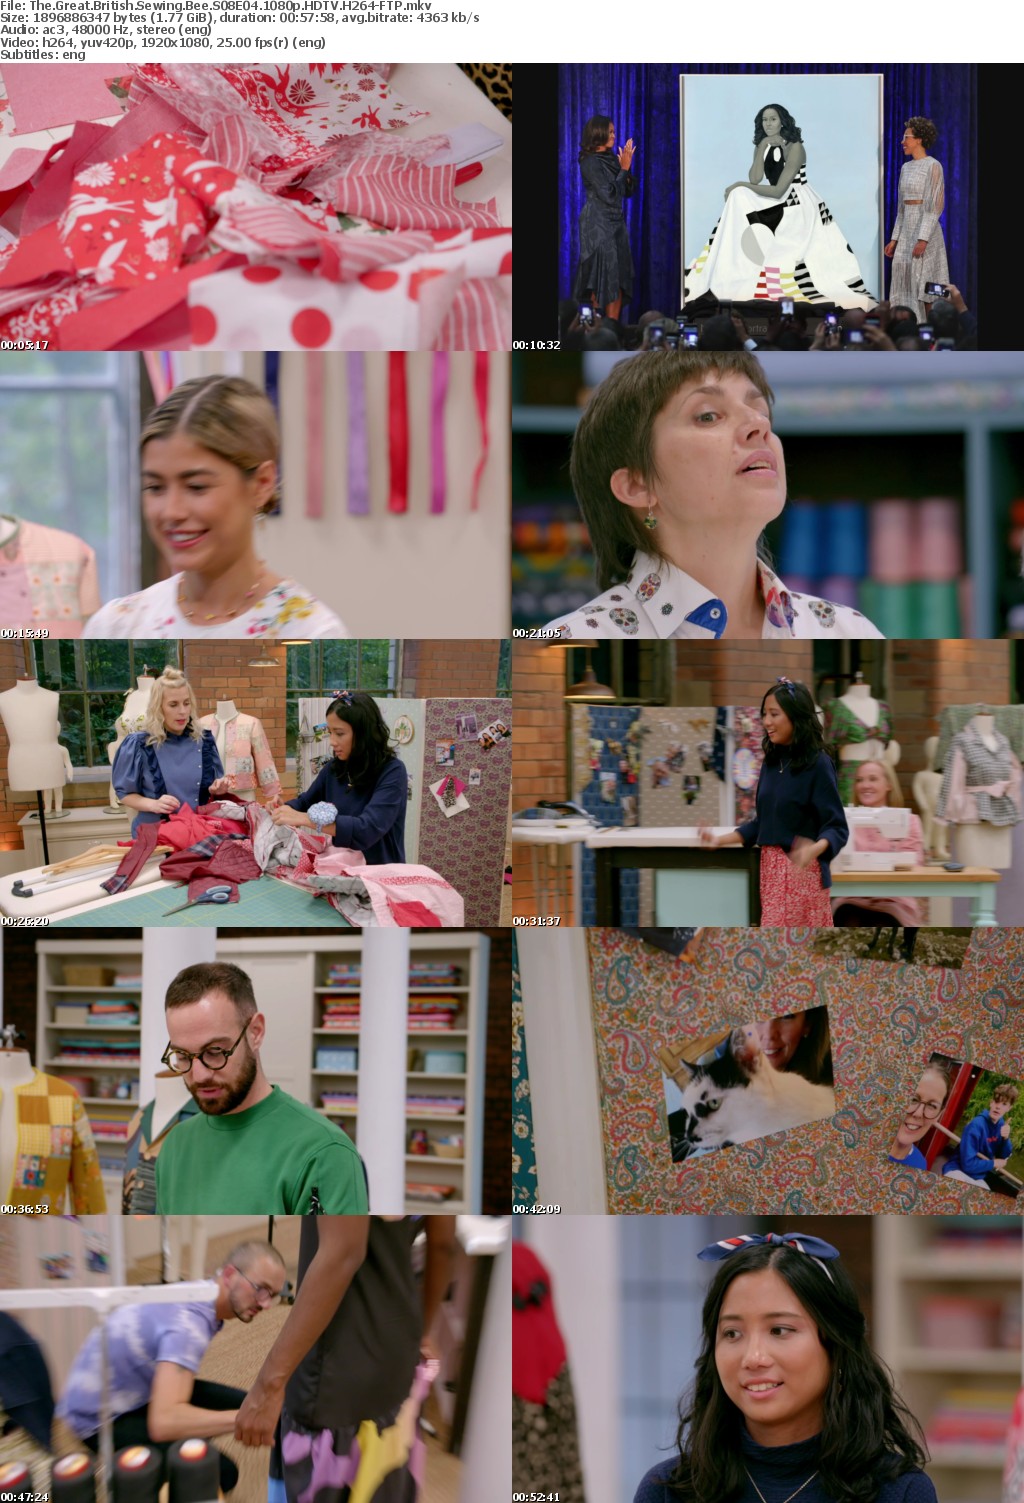 The Great British Sewing Bee S08E04 1080p HDTV H264-FTP